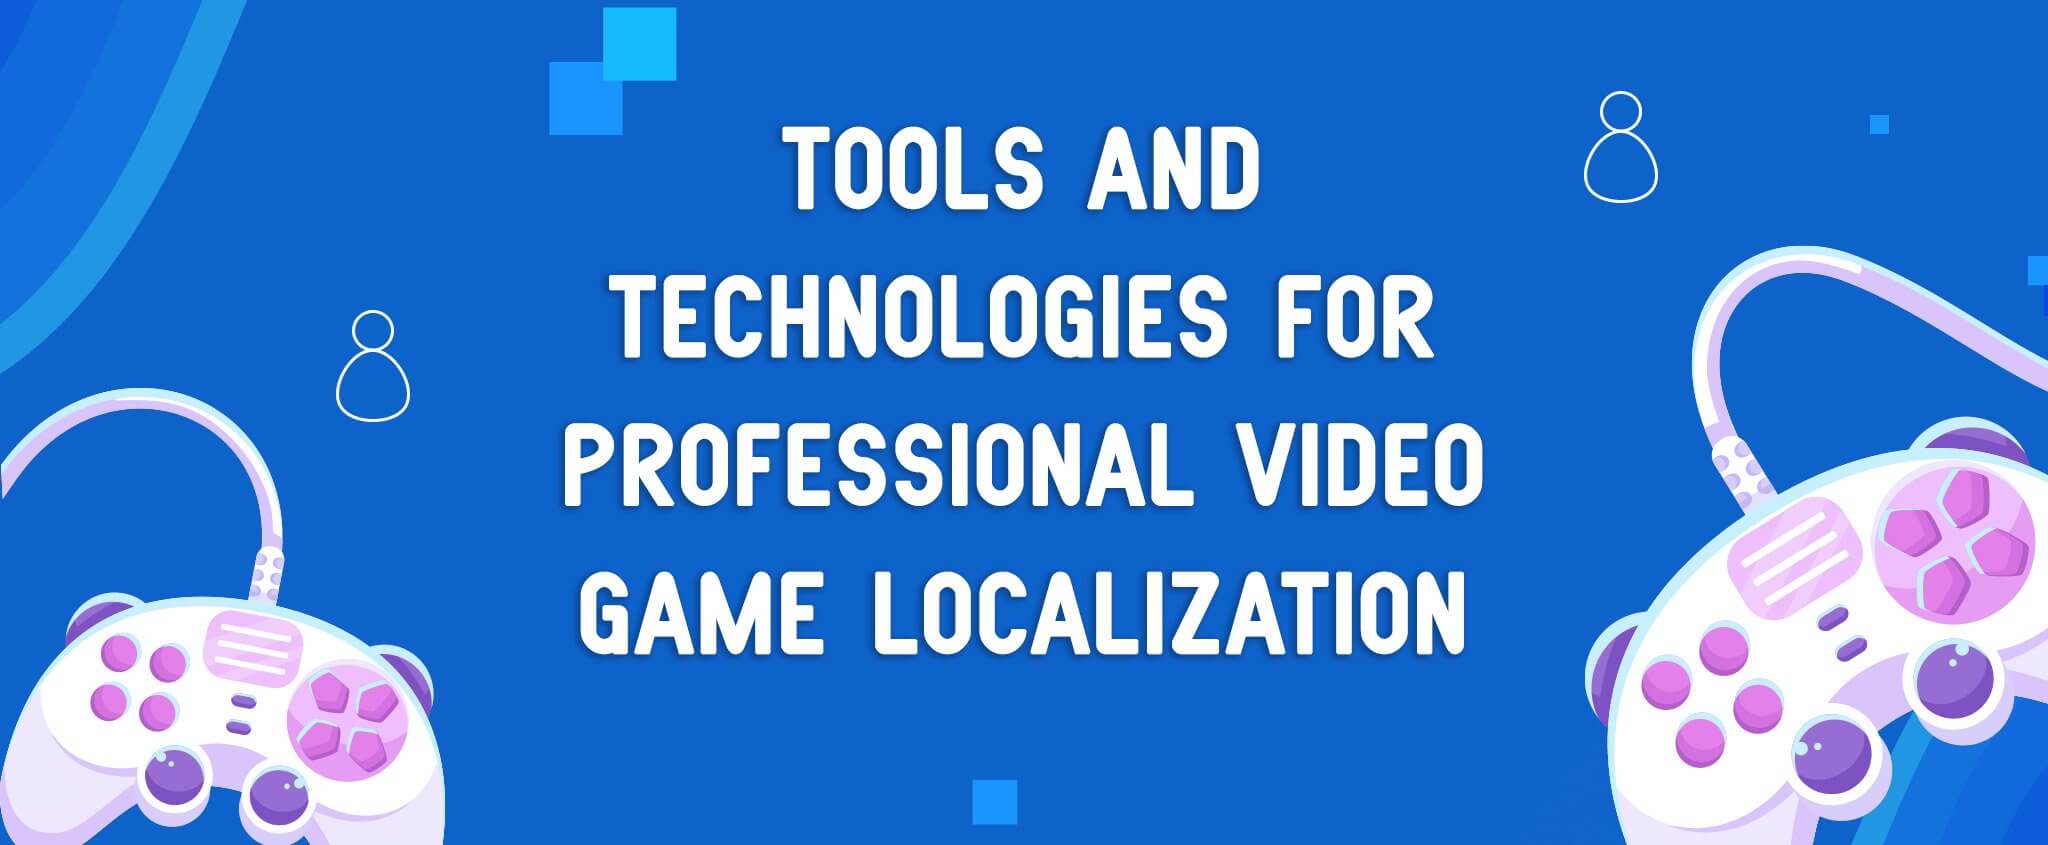 Tools and Technologies for Professional Video Game Localization